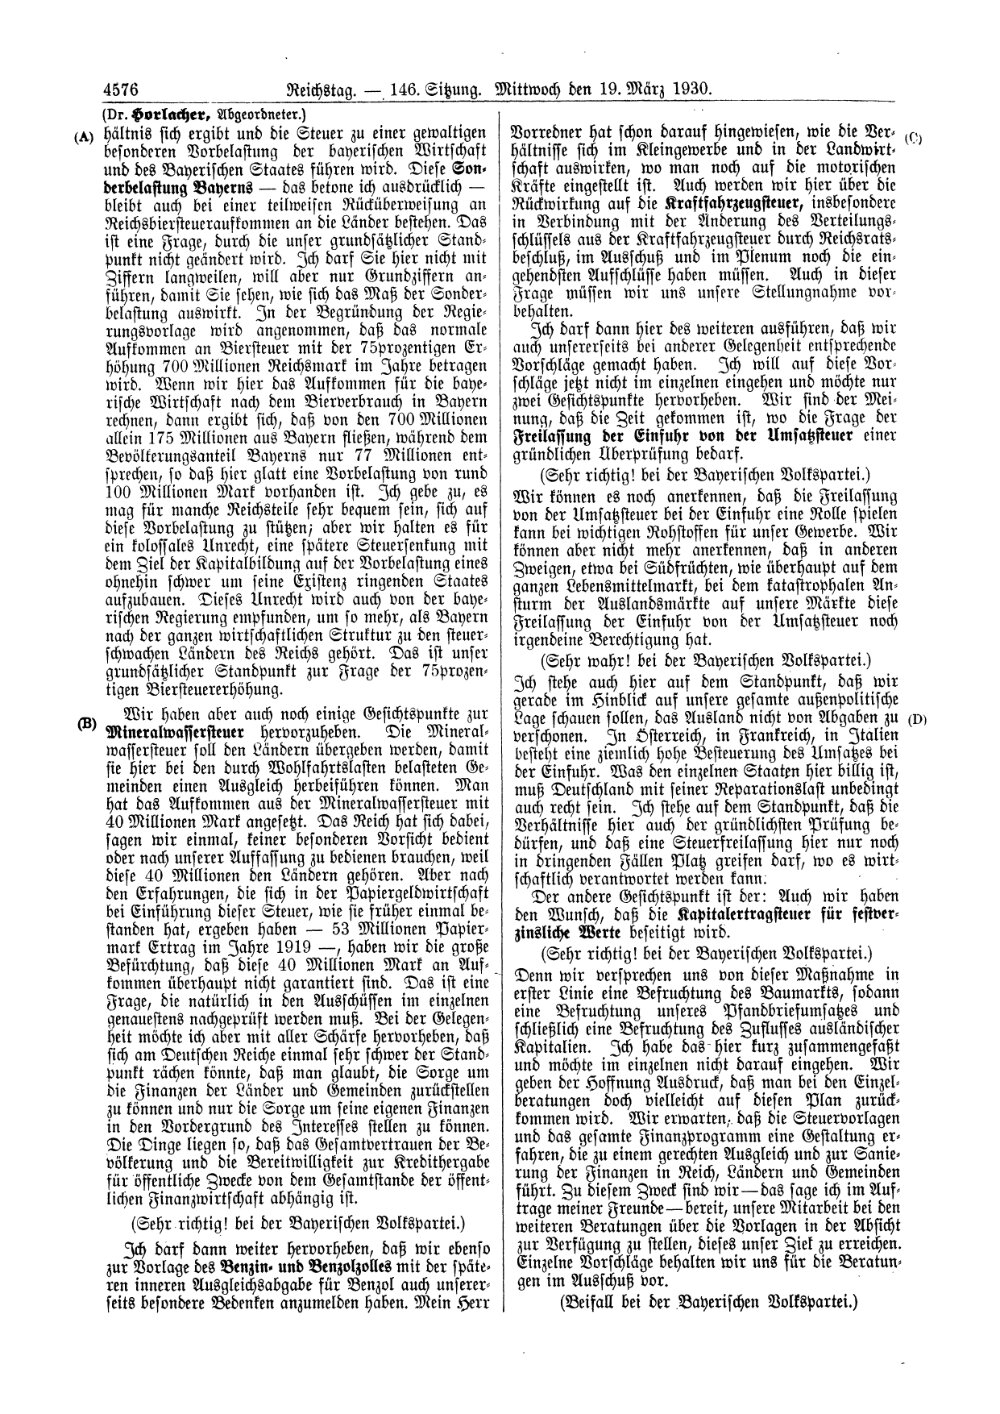 Scan of page 4576